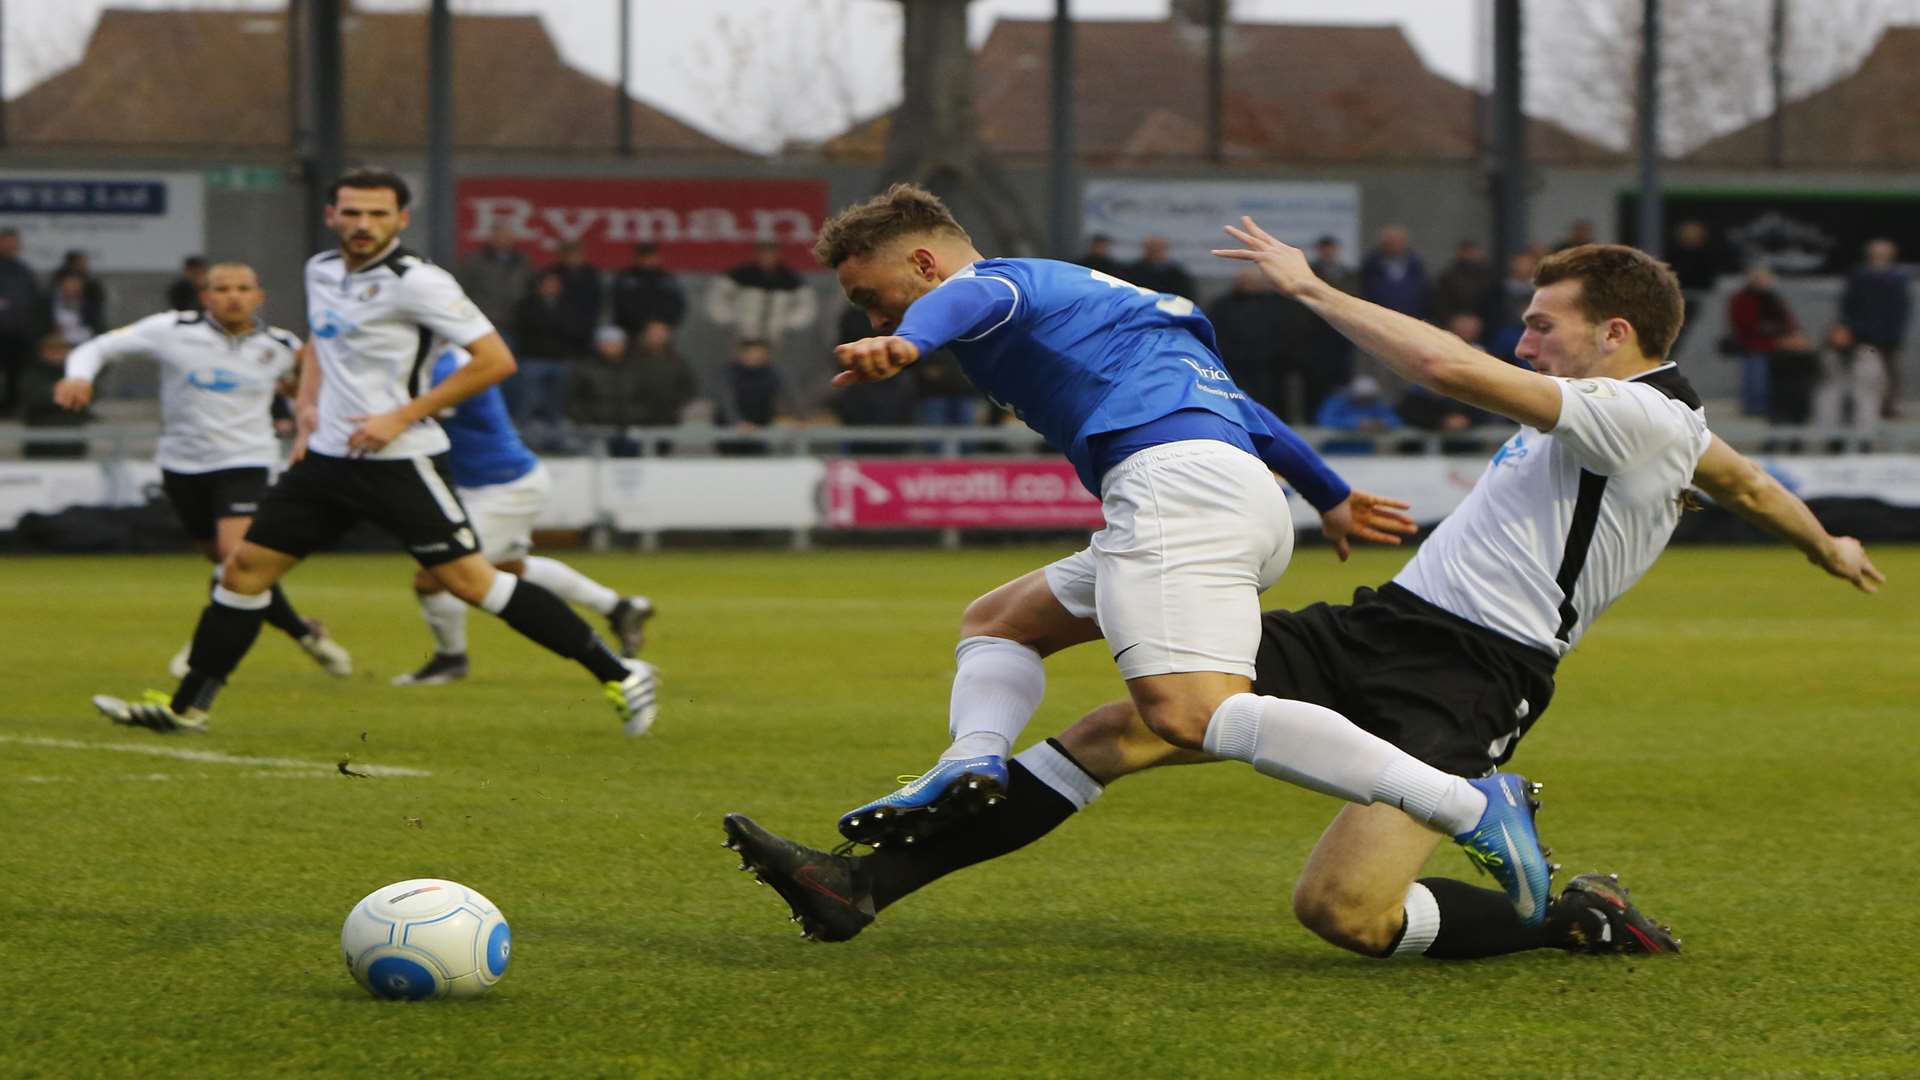 Keaton Wood makes a tackle against Dover Picture: Andy Jones